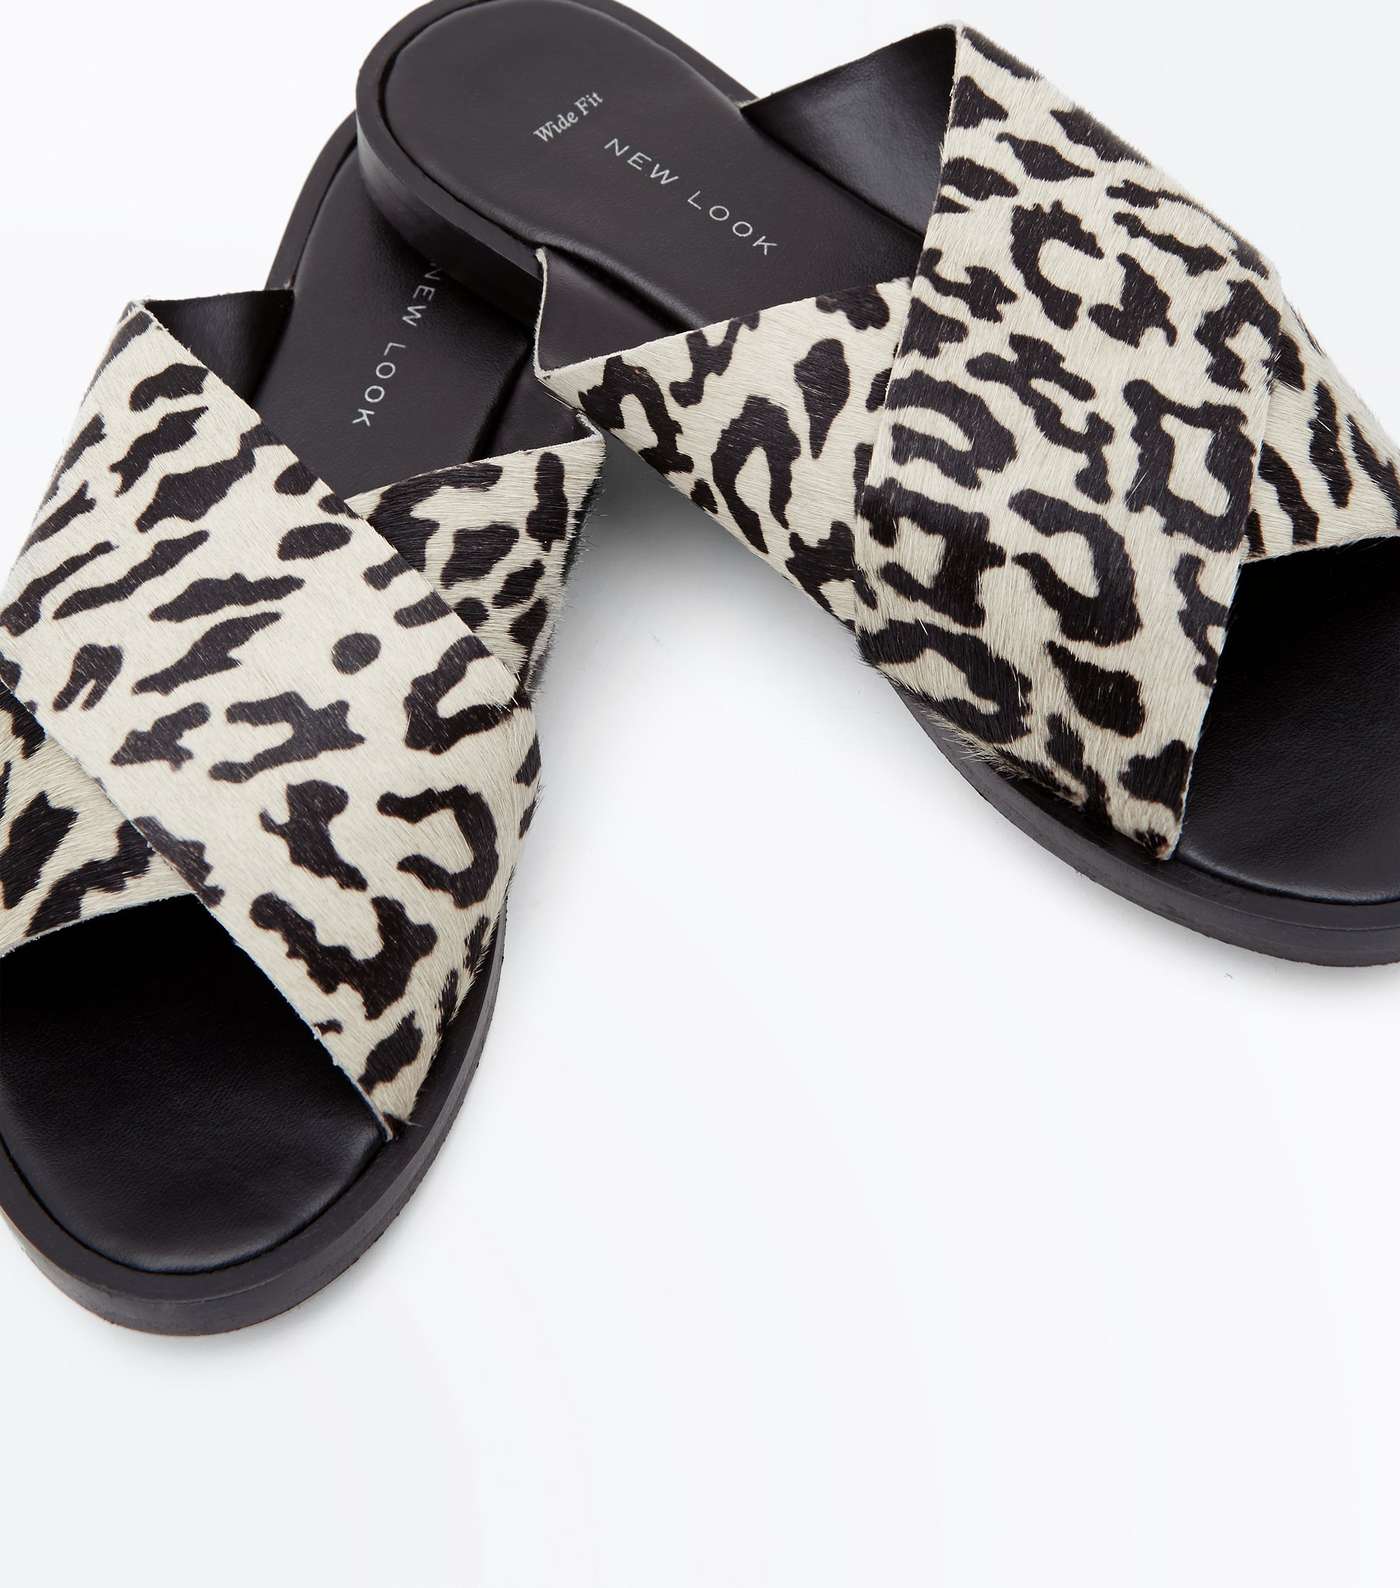 Wide Fit Cream Leather Leopard Print Sliders Image 3